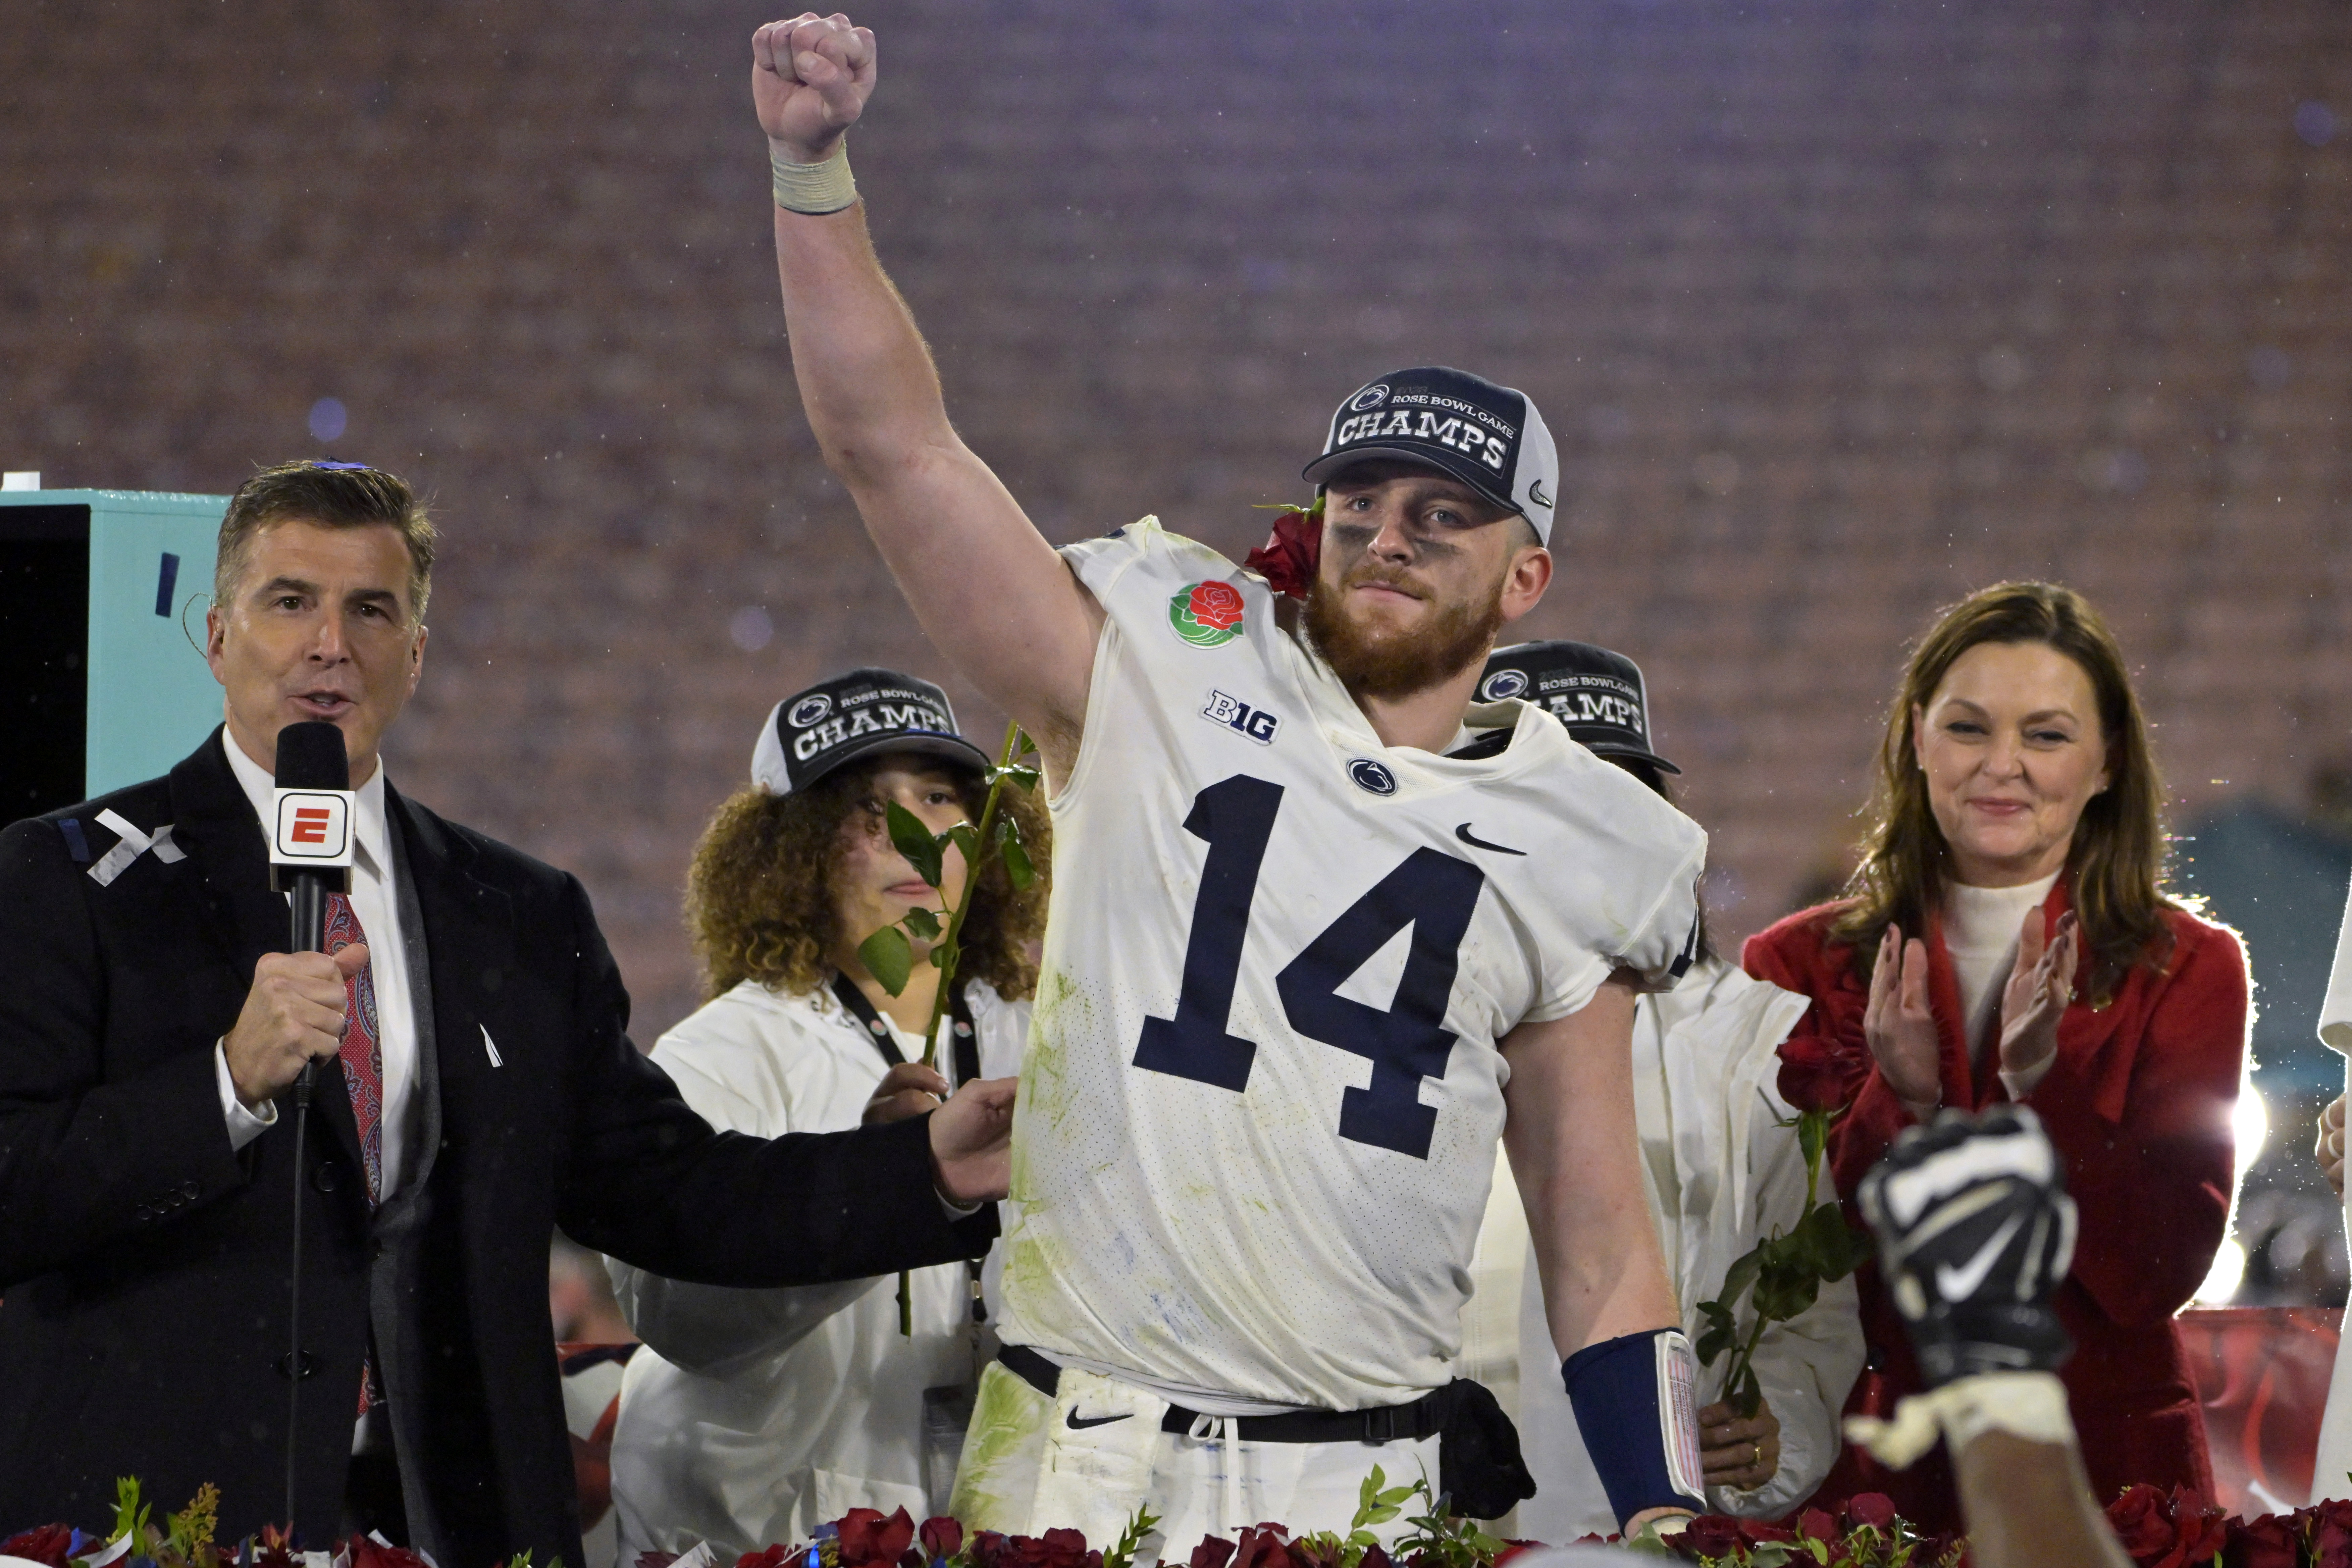 Jan 2, 2023; Pasadena, California, USA; Penn State Nittany Lions quarterback Sean Clifford (14) celebrates on the podium after defeating the Utah Utes in the 109th Rose Bowl game at the Rose Bowl.